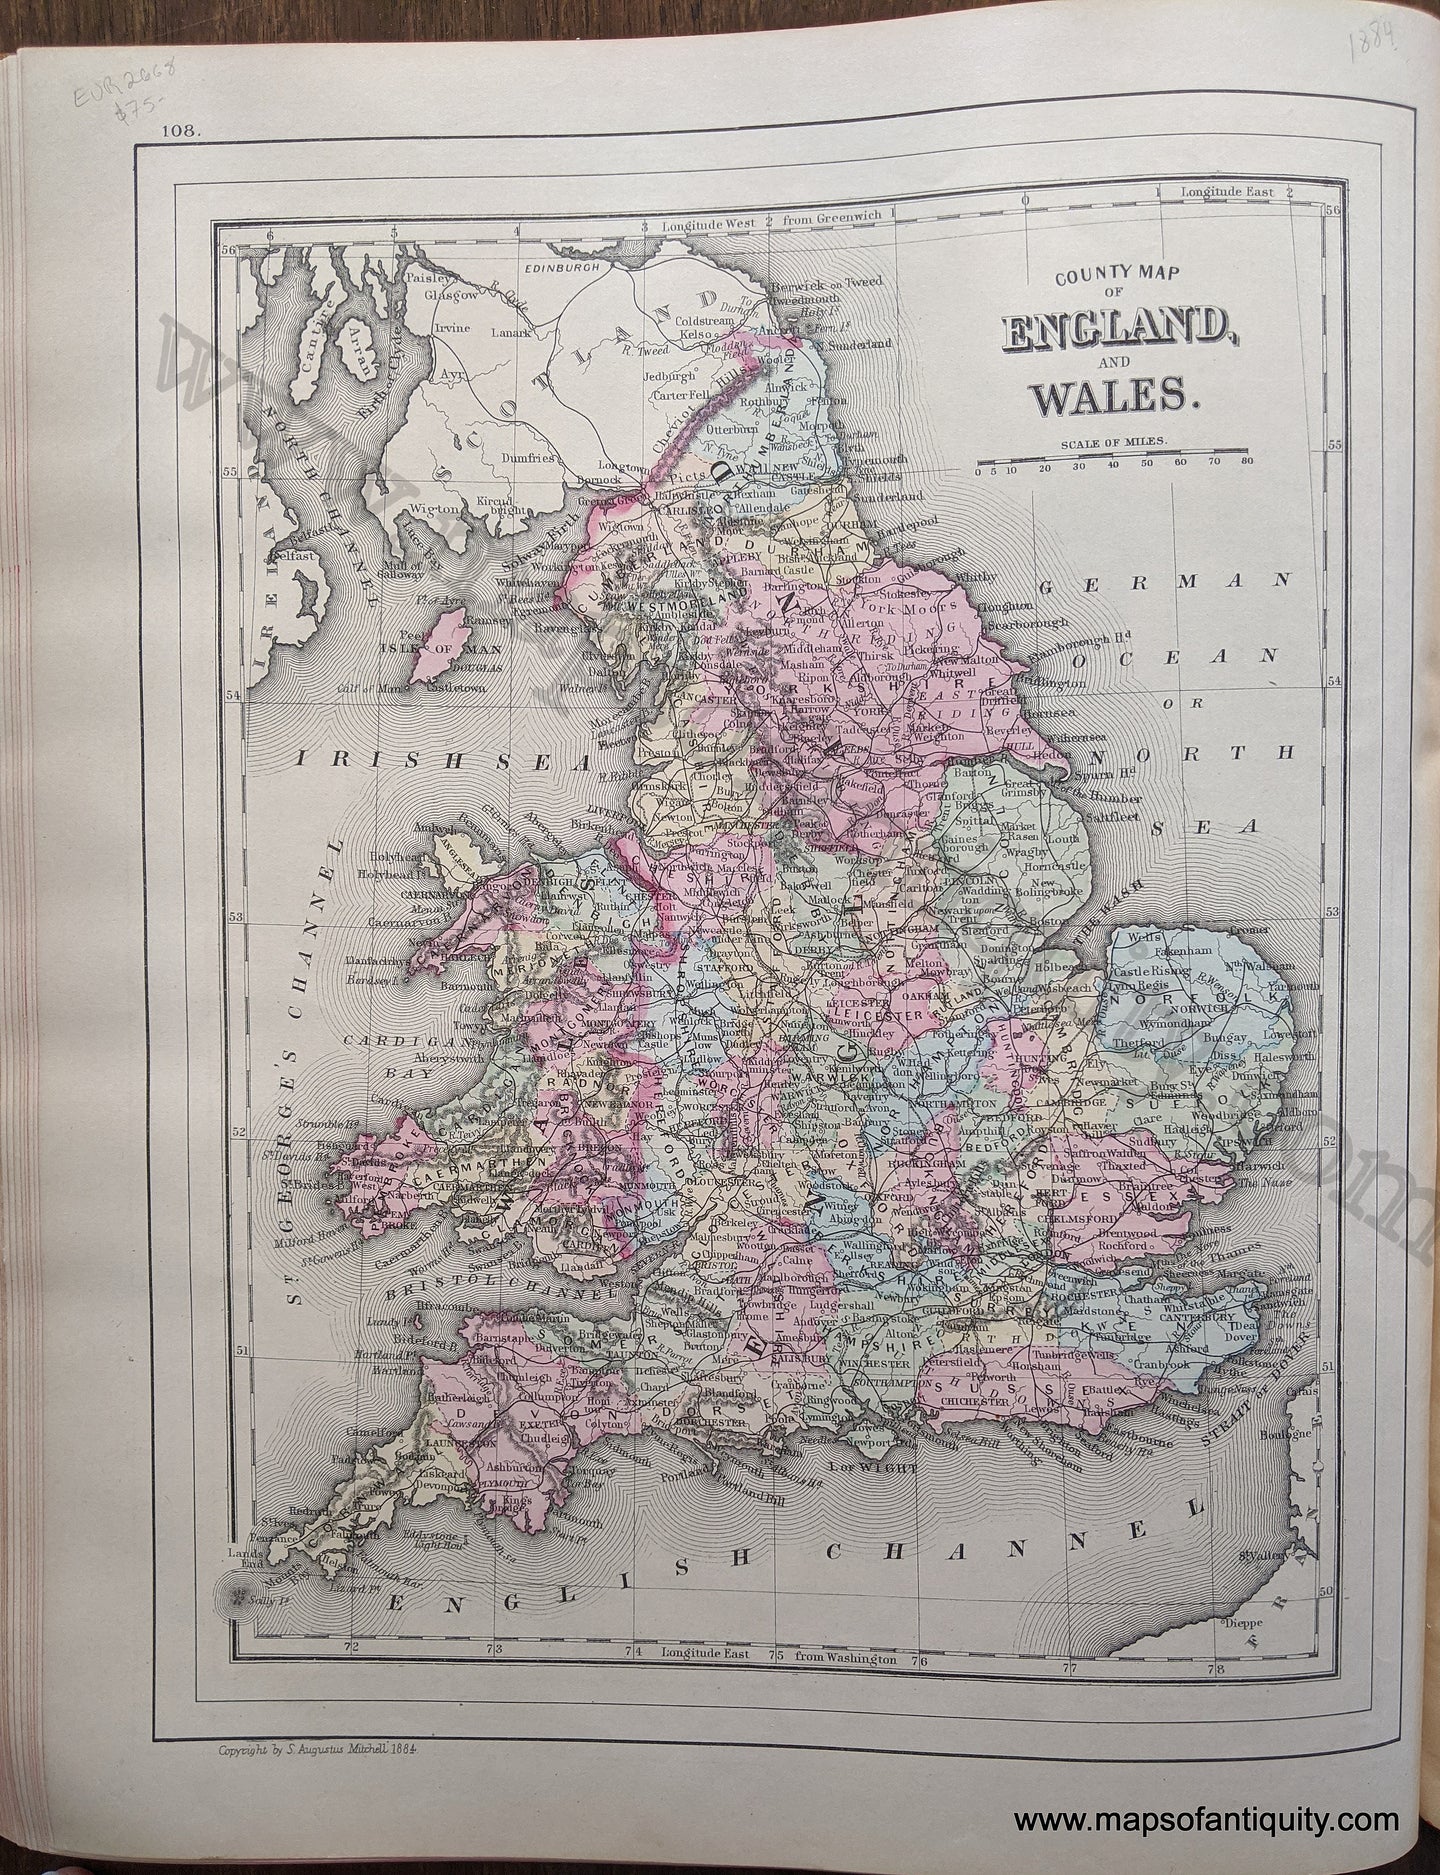 Antique-Hand-Colored-Map-County-Map-of-England-and-Wales-Europe-England-1884-Mitchell-Maps-Of-Antiquity-1800s-19th-century